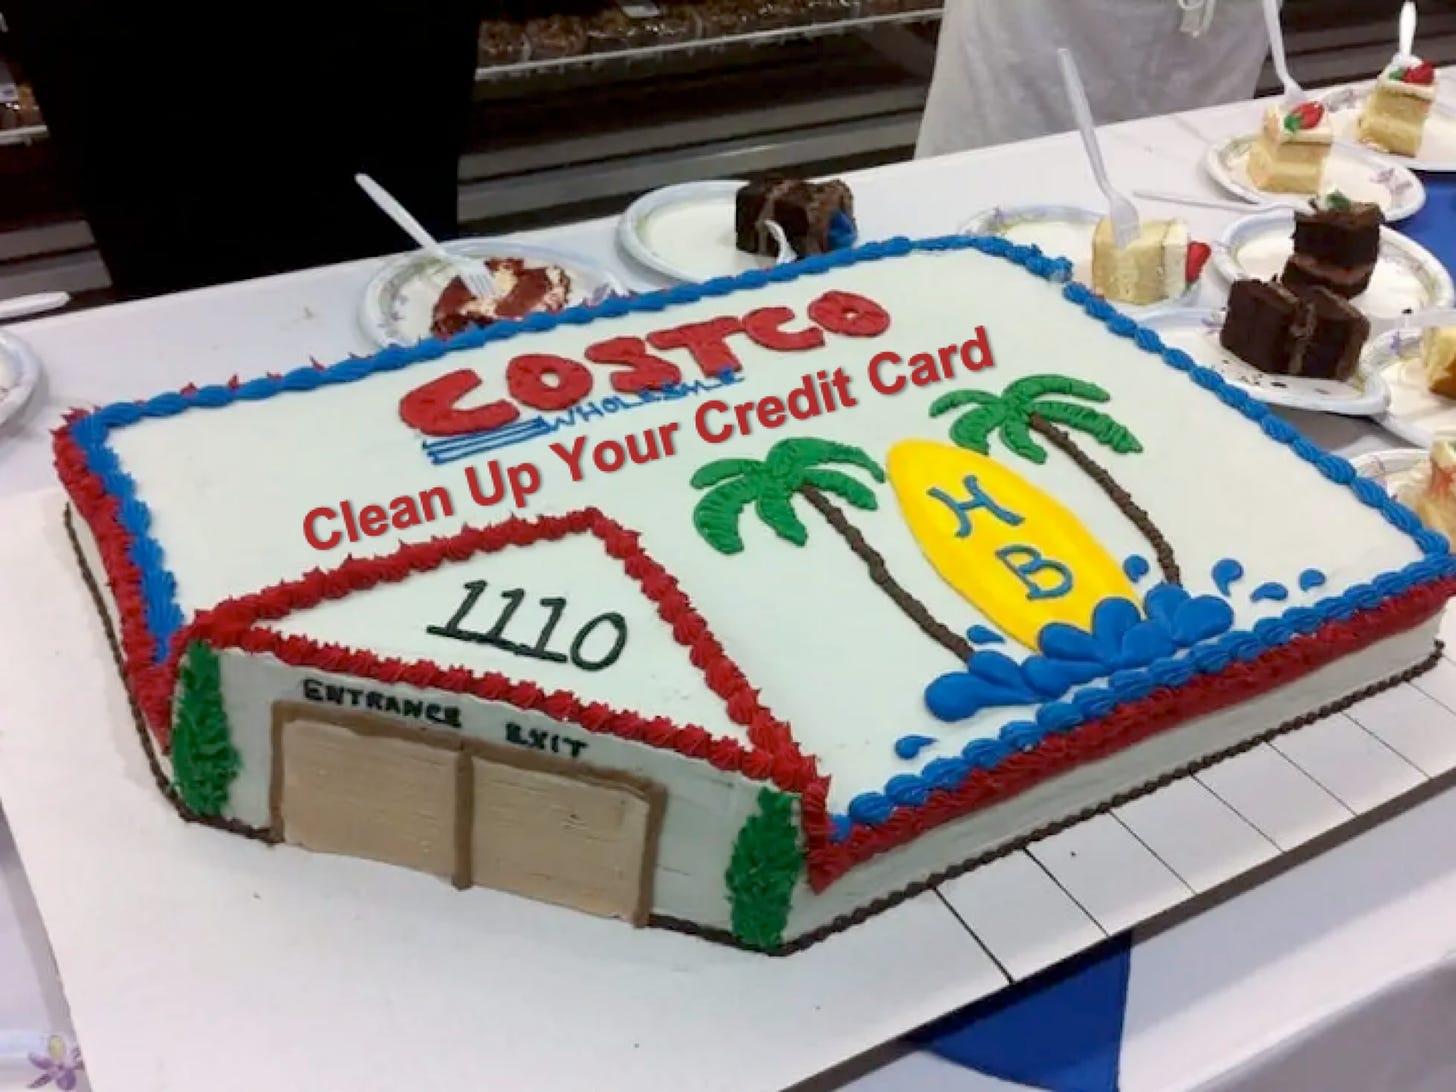 Picture of a large sheet cake shaped and decorated like a Costco credit card with the message: Costco Clean Up Your Credit Card.